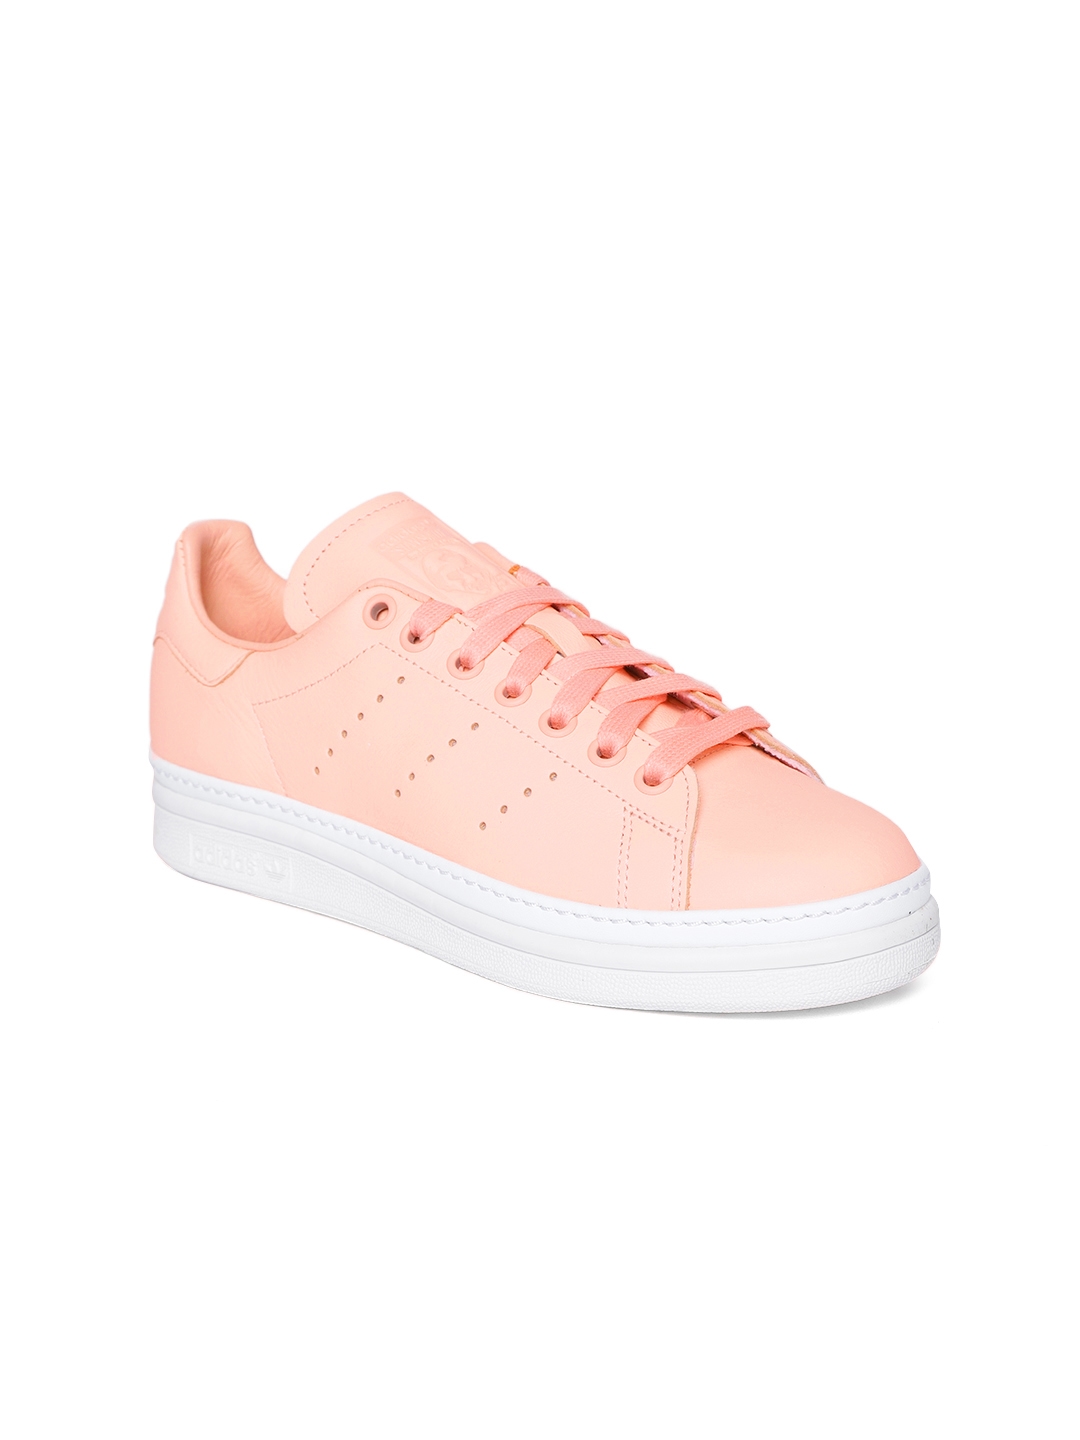 Buy Adidas Originals Women Peach Coloured Stan Smith New Bold Sneakers -  Casual Shoes for Women 6842580 | Myntra